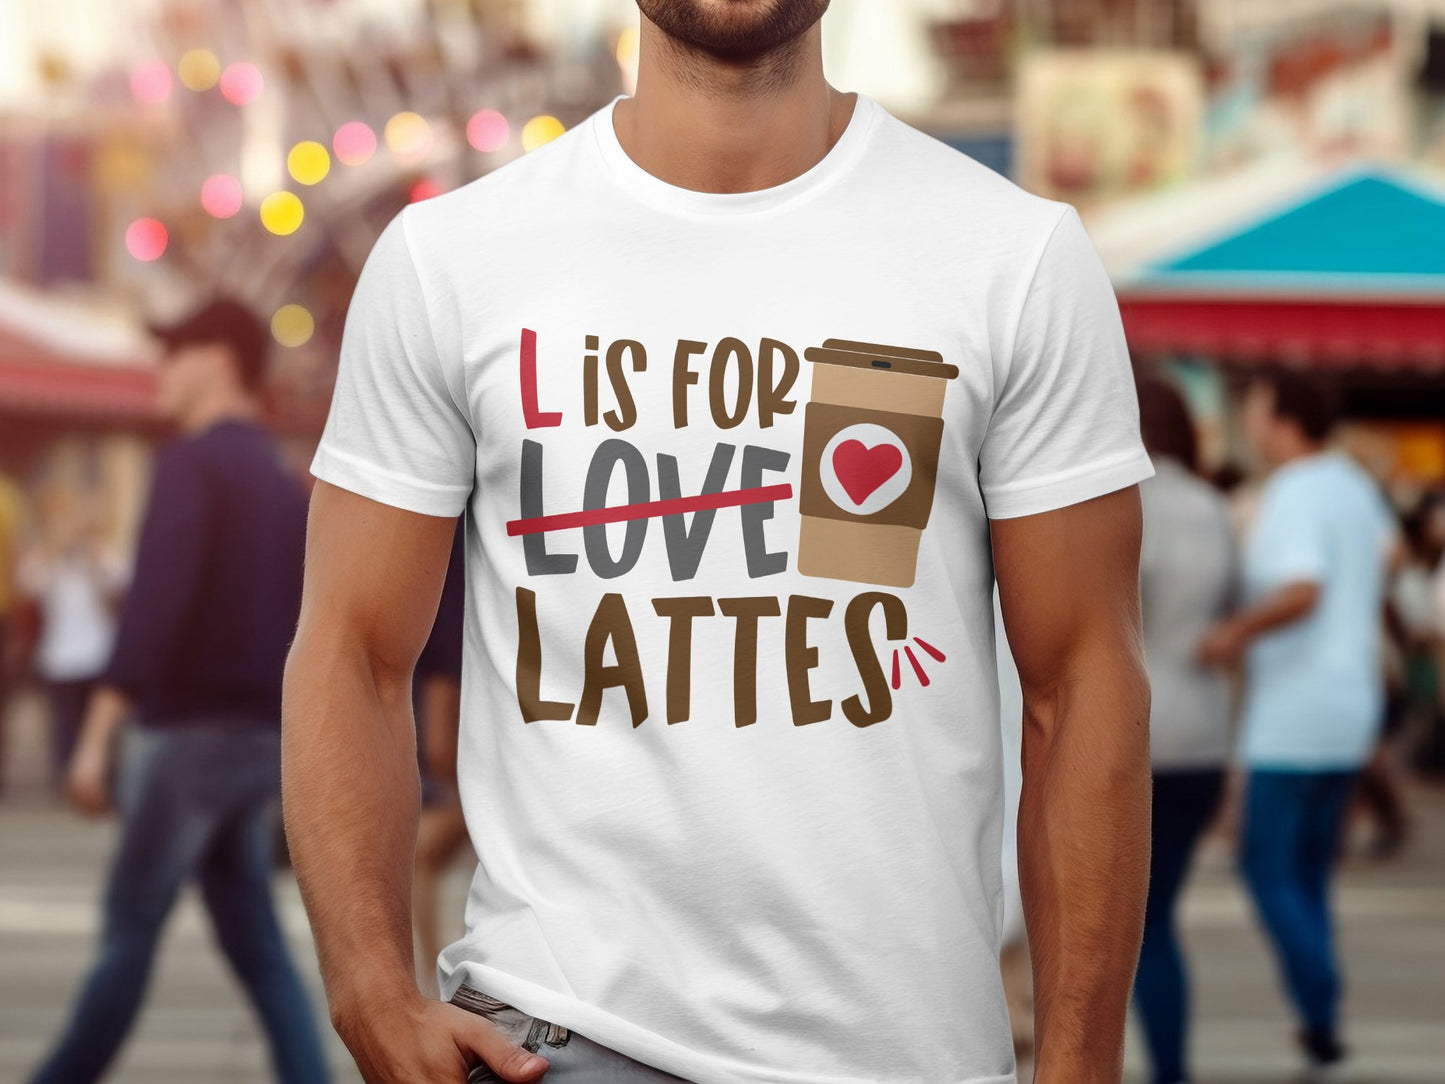 L is for Lattes T-shirt